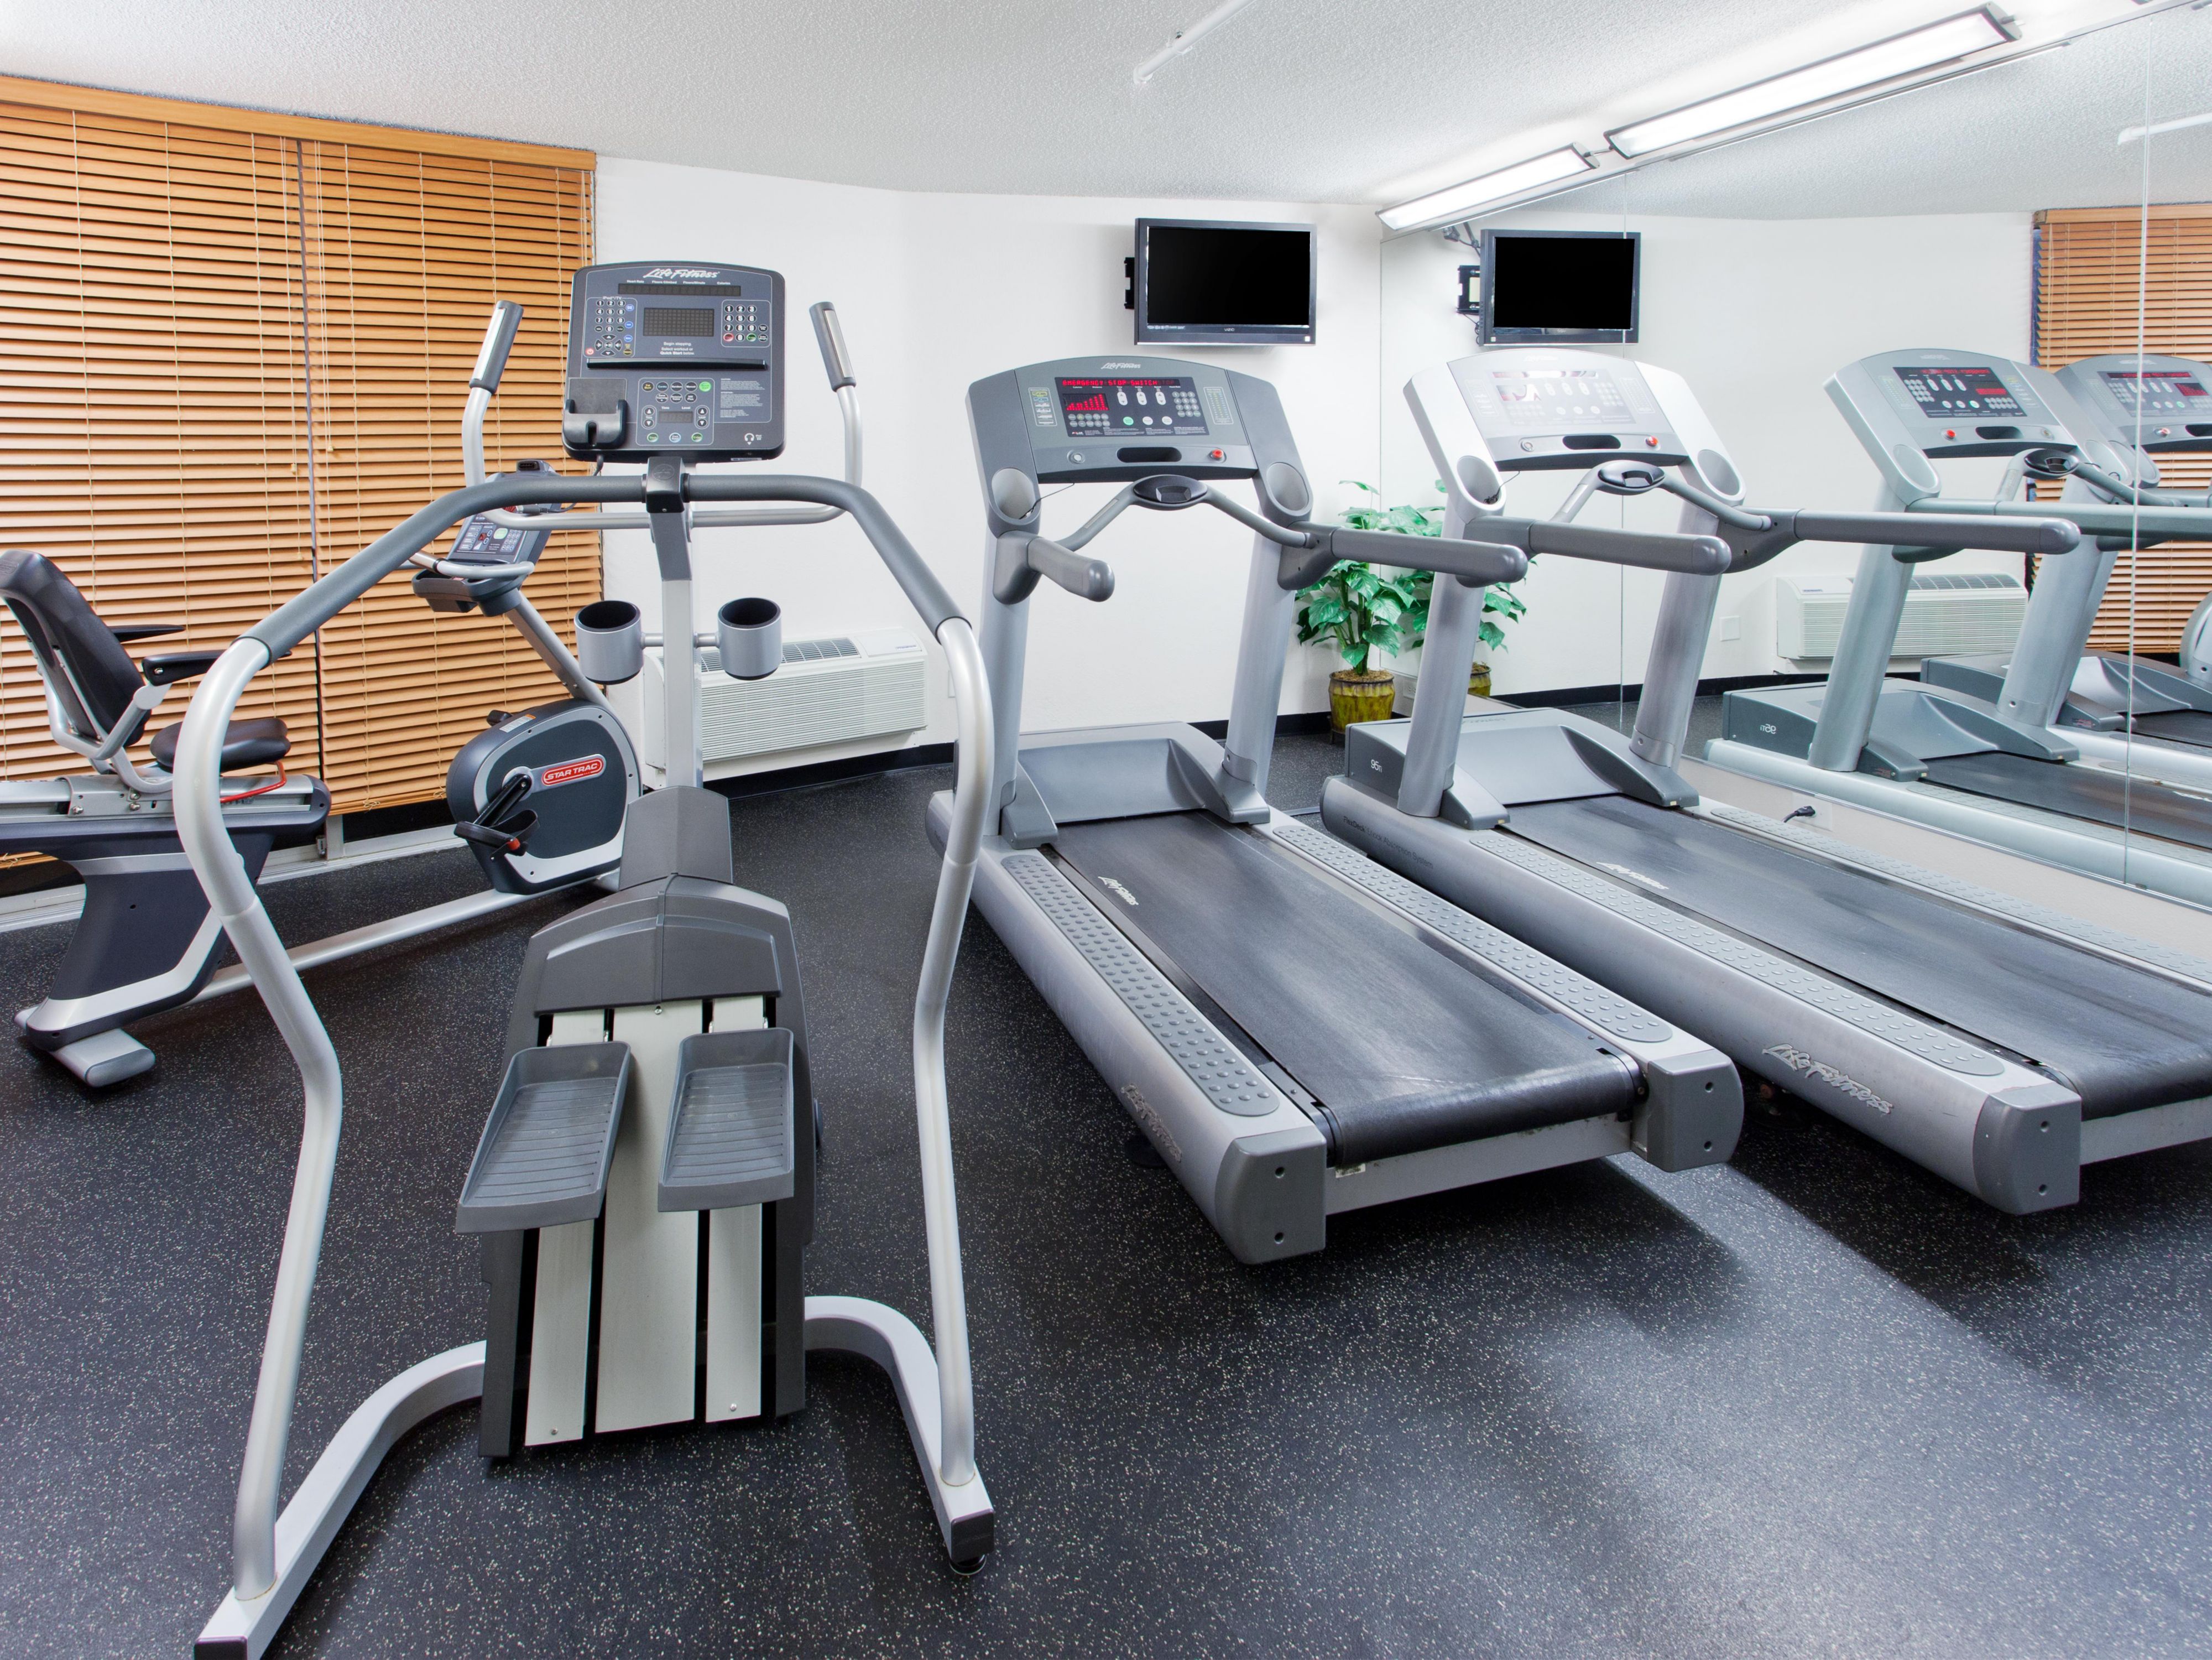 Work out on your schedule anytime, day or night, in our 24-hour fitness center. From cardio to strength, our fitness center is designed to empower your fitness journey and embrace wellness at your own pace. 